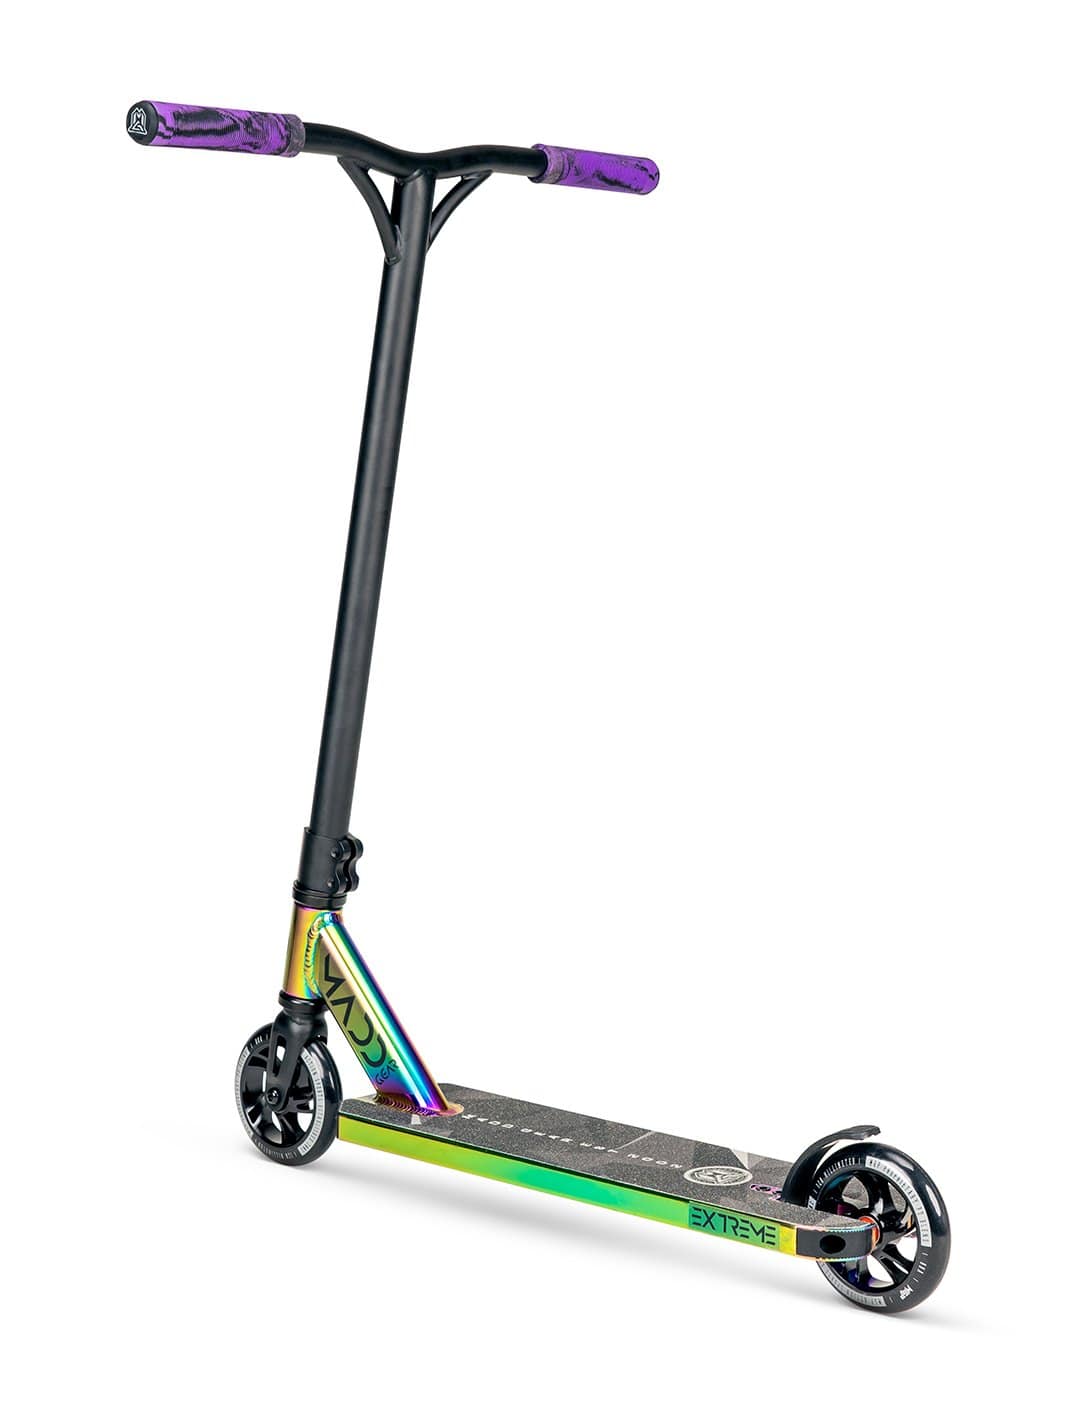 Madd Gear MGP Renegade Extreme Stunt Complete scooter Neochrome Oil Slick Light Quality